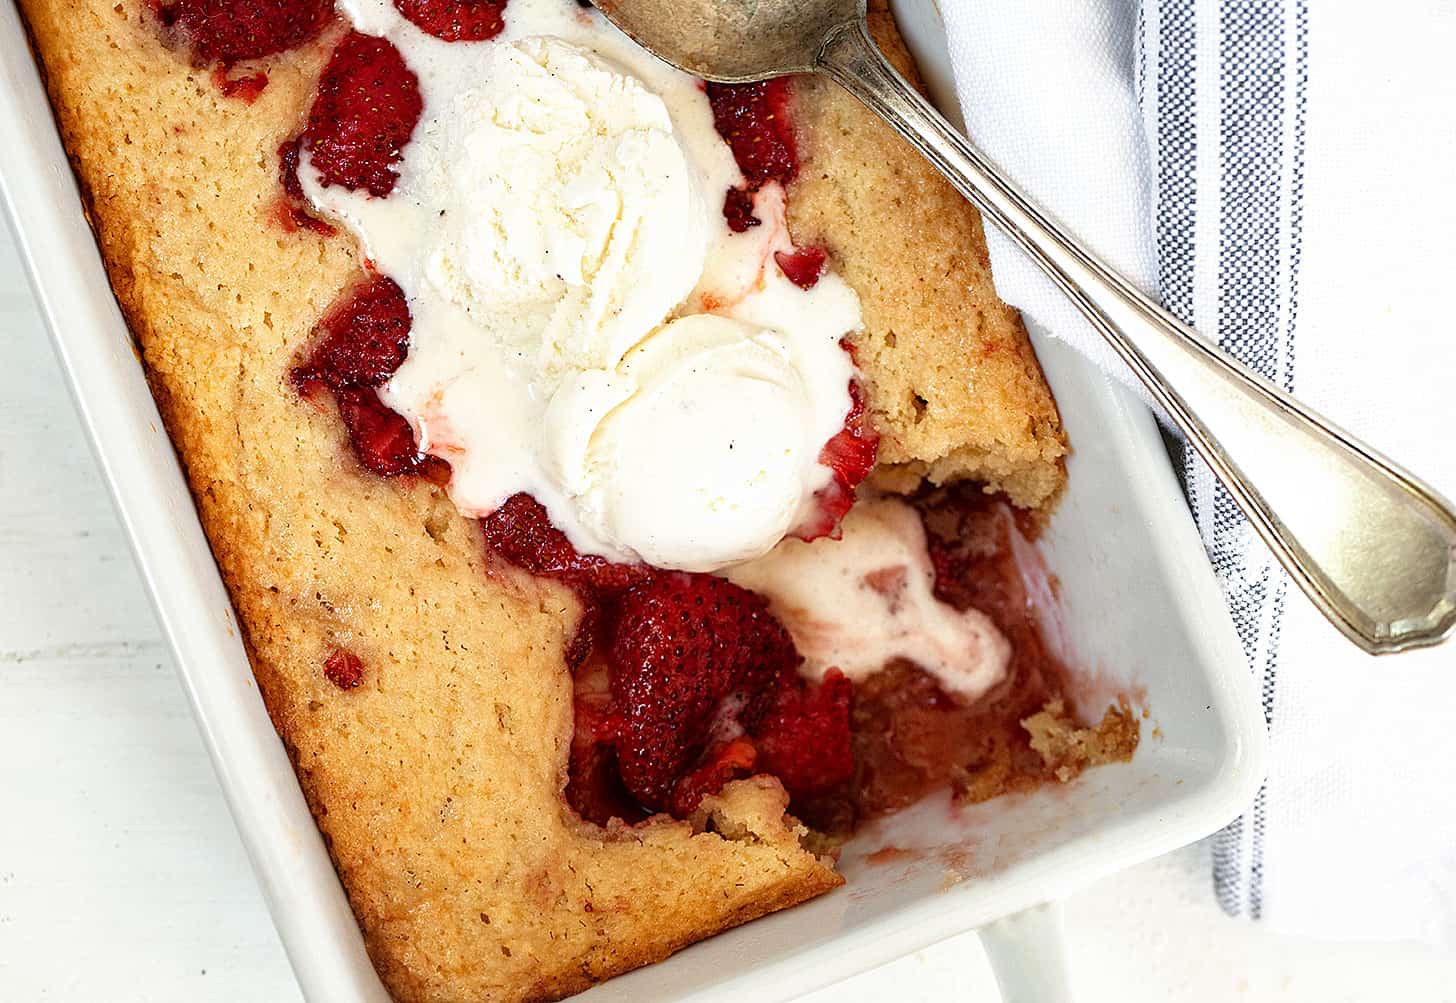 strawberry spoon cake in baking dish with ice cream